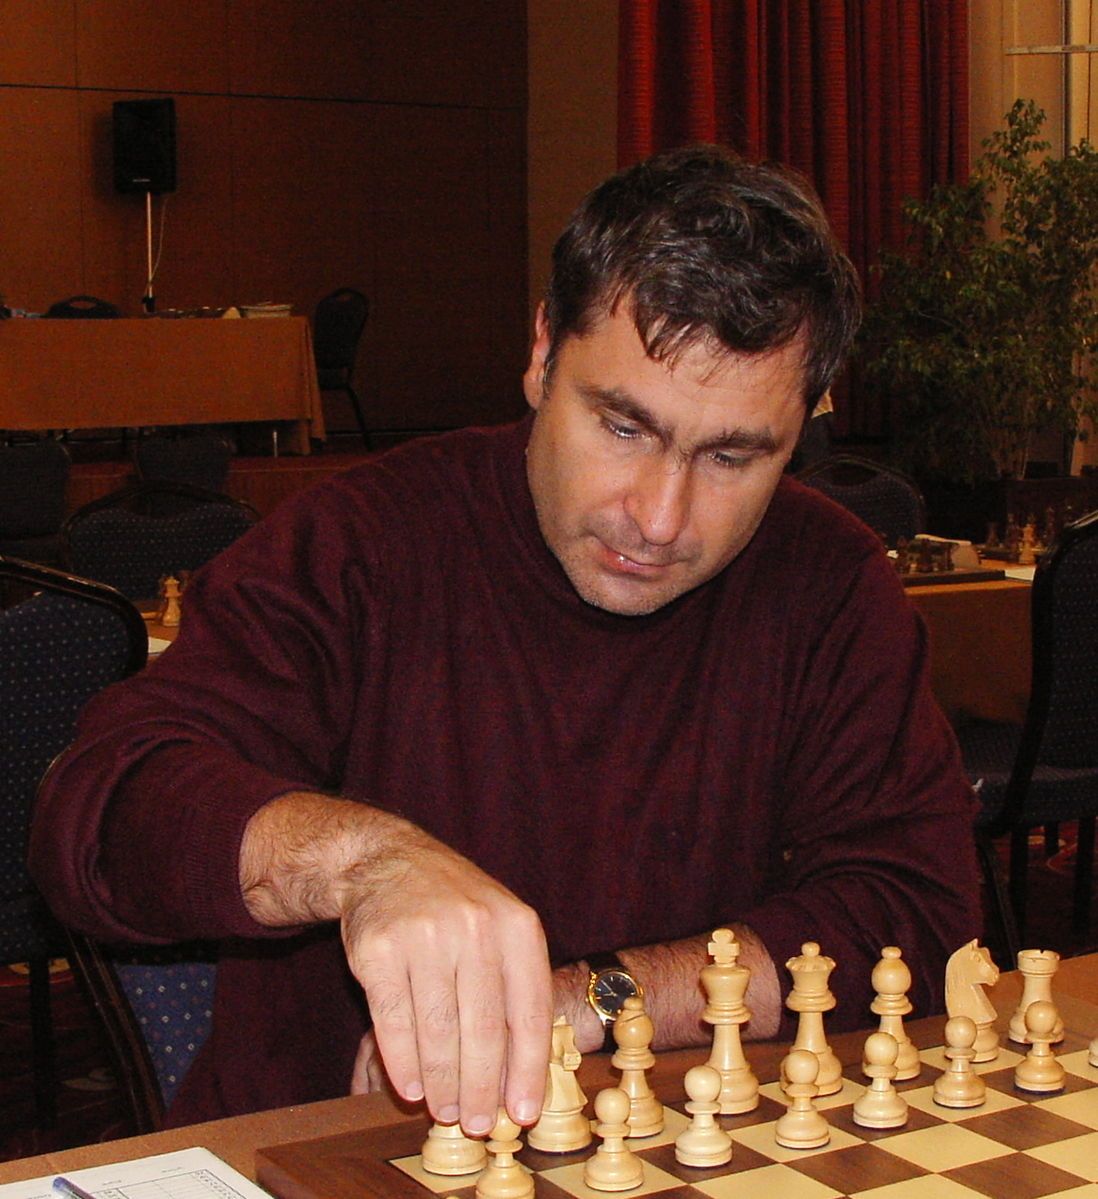 Both players in their prime, could Vassily Ivanchuk defeat Bobby